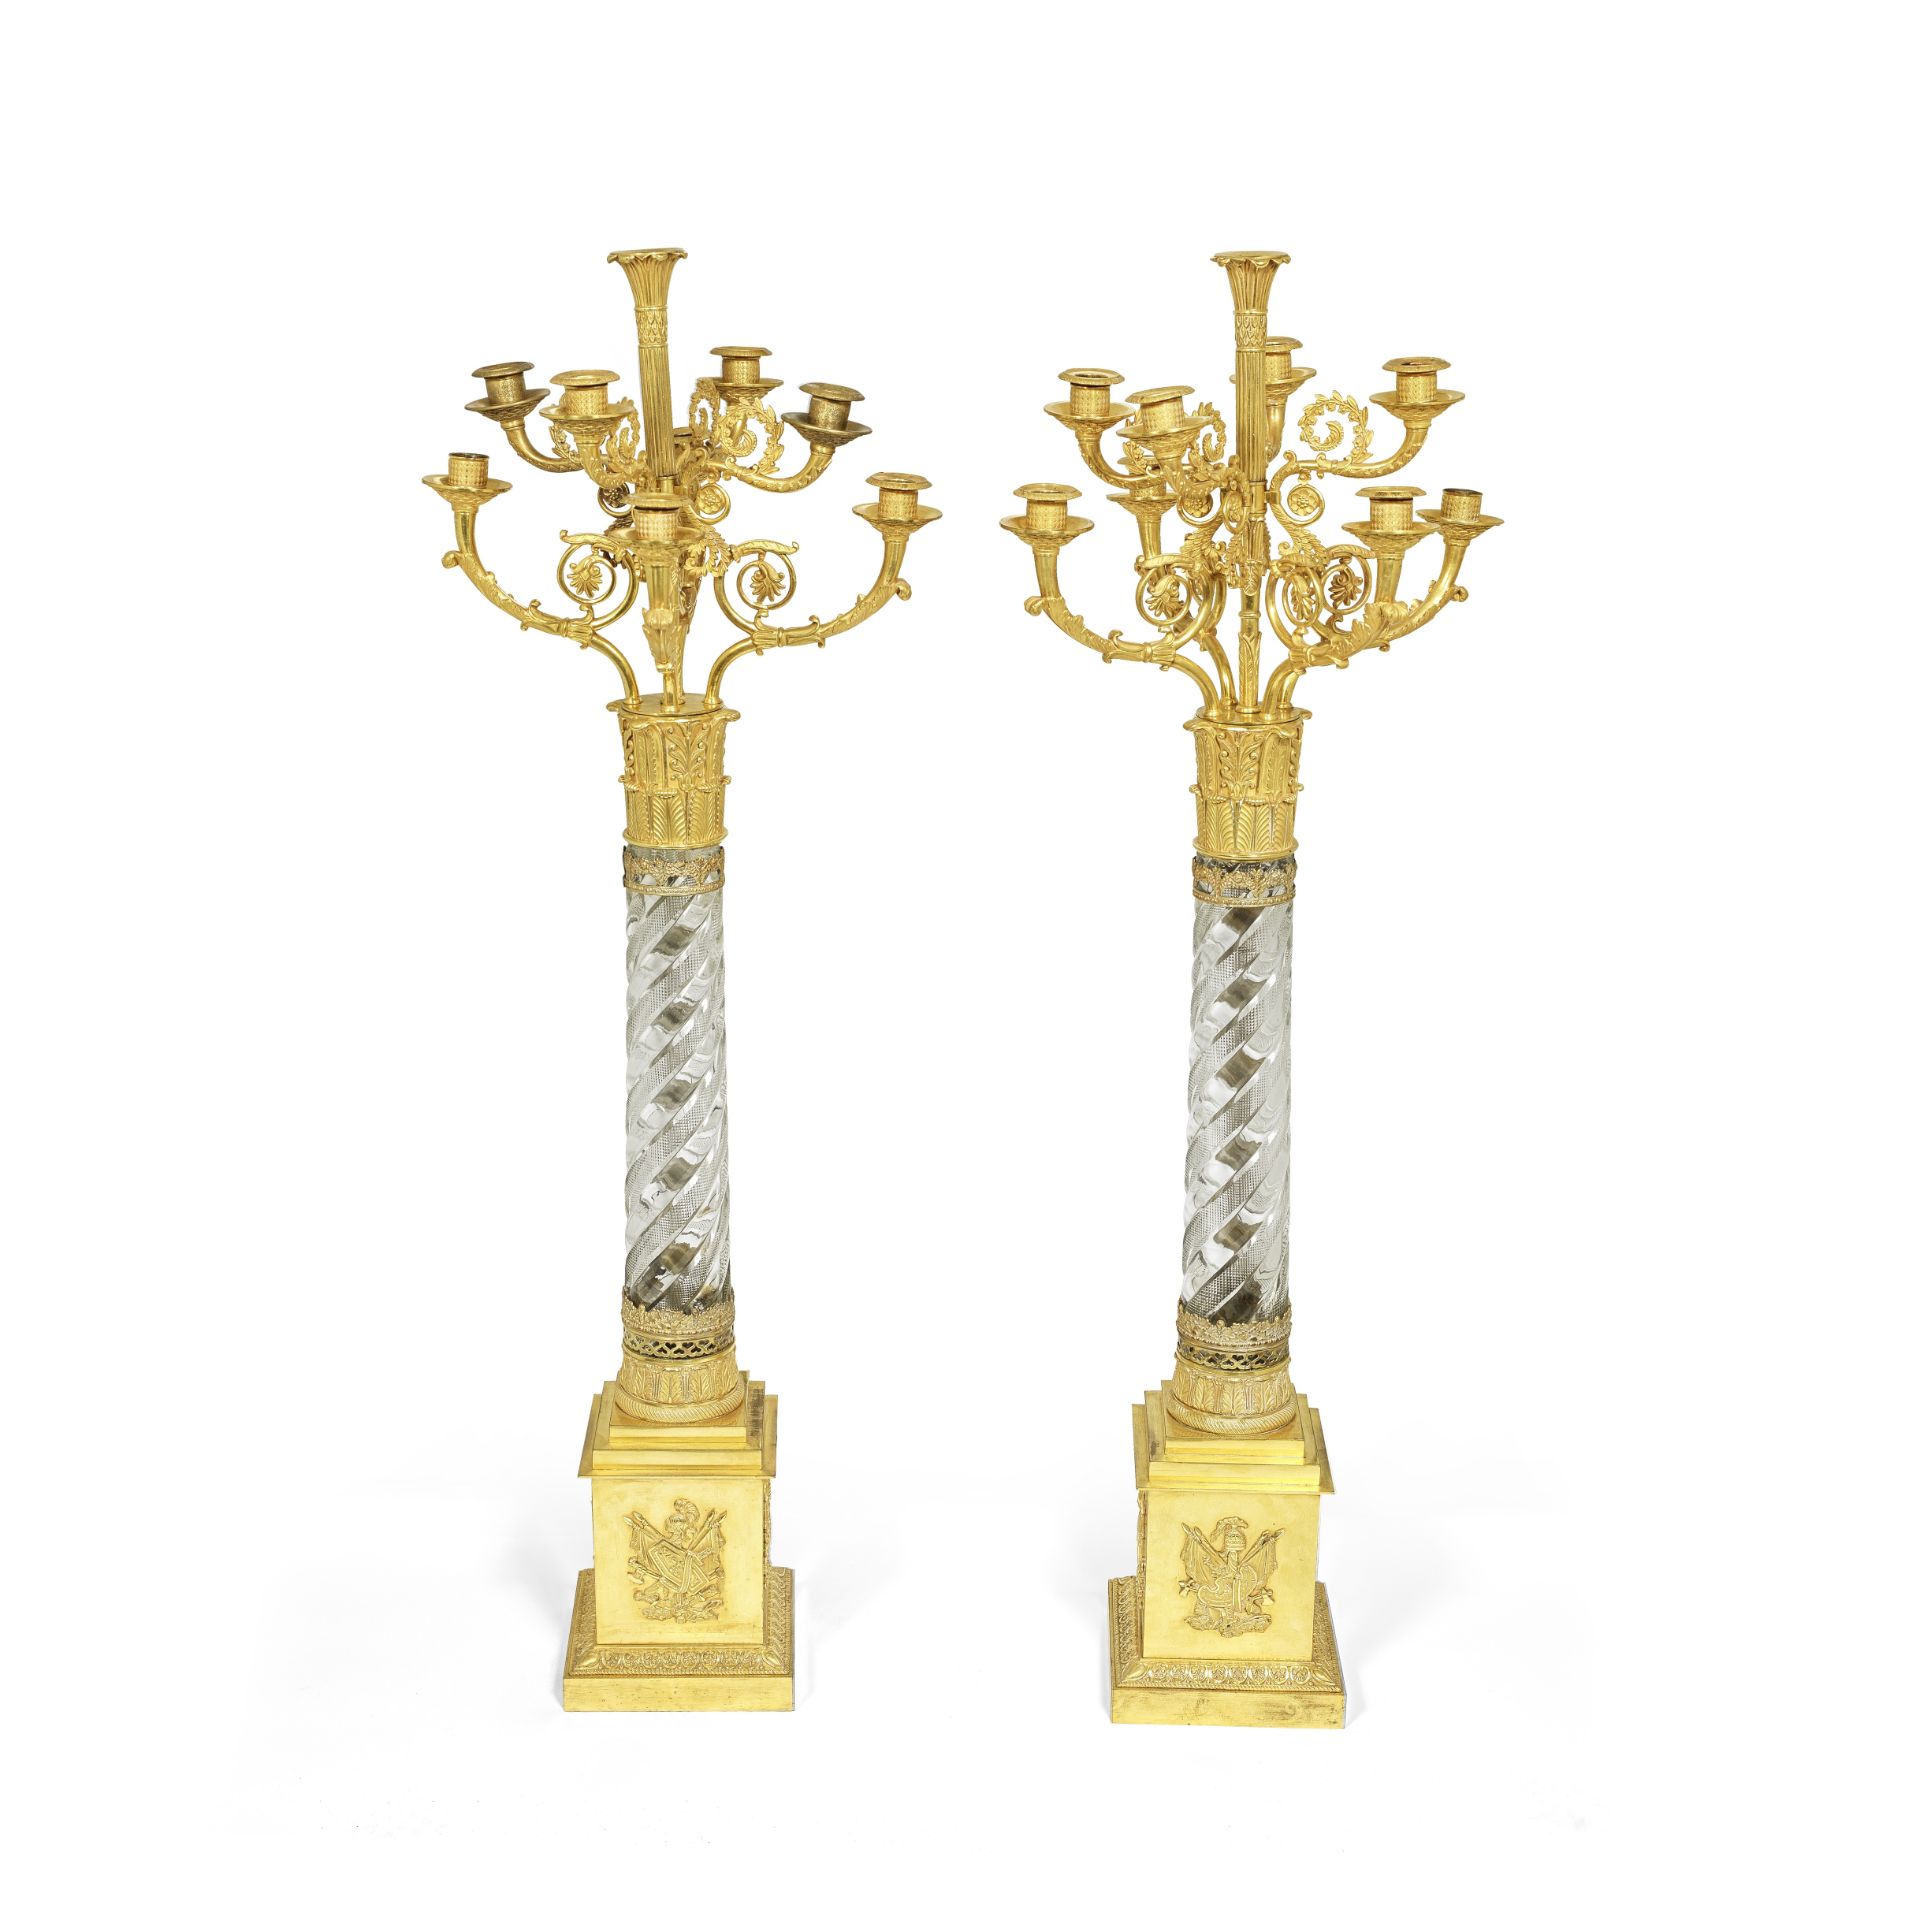 A pair of early 19th century French gilt bronze and cut glass nine light candelabra signed Thomir...